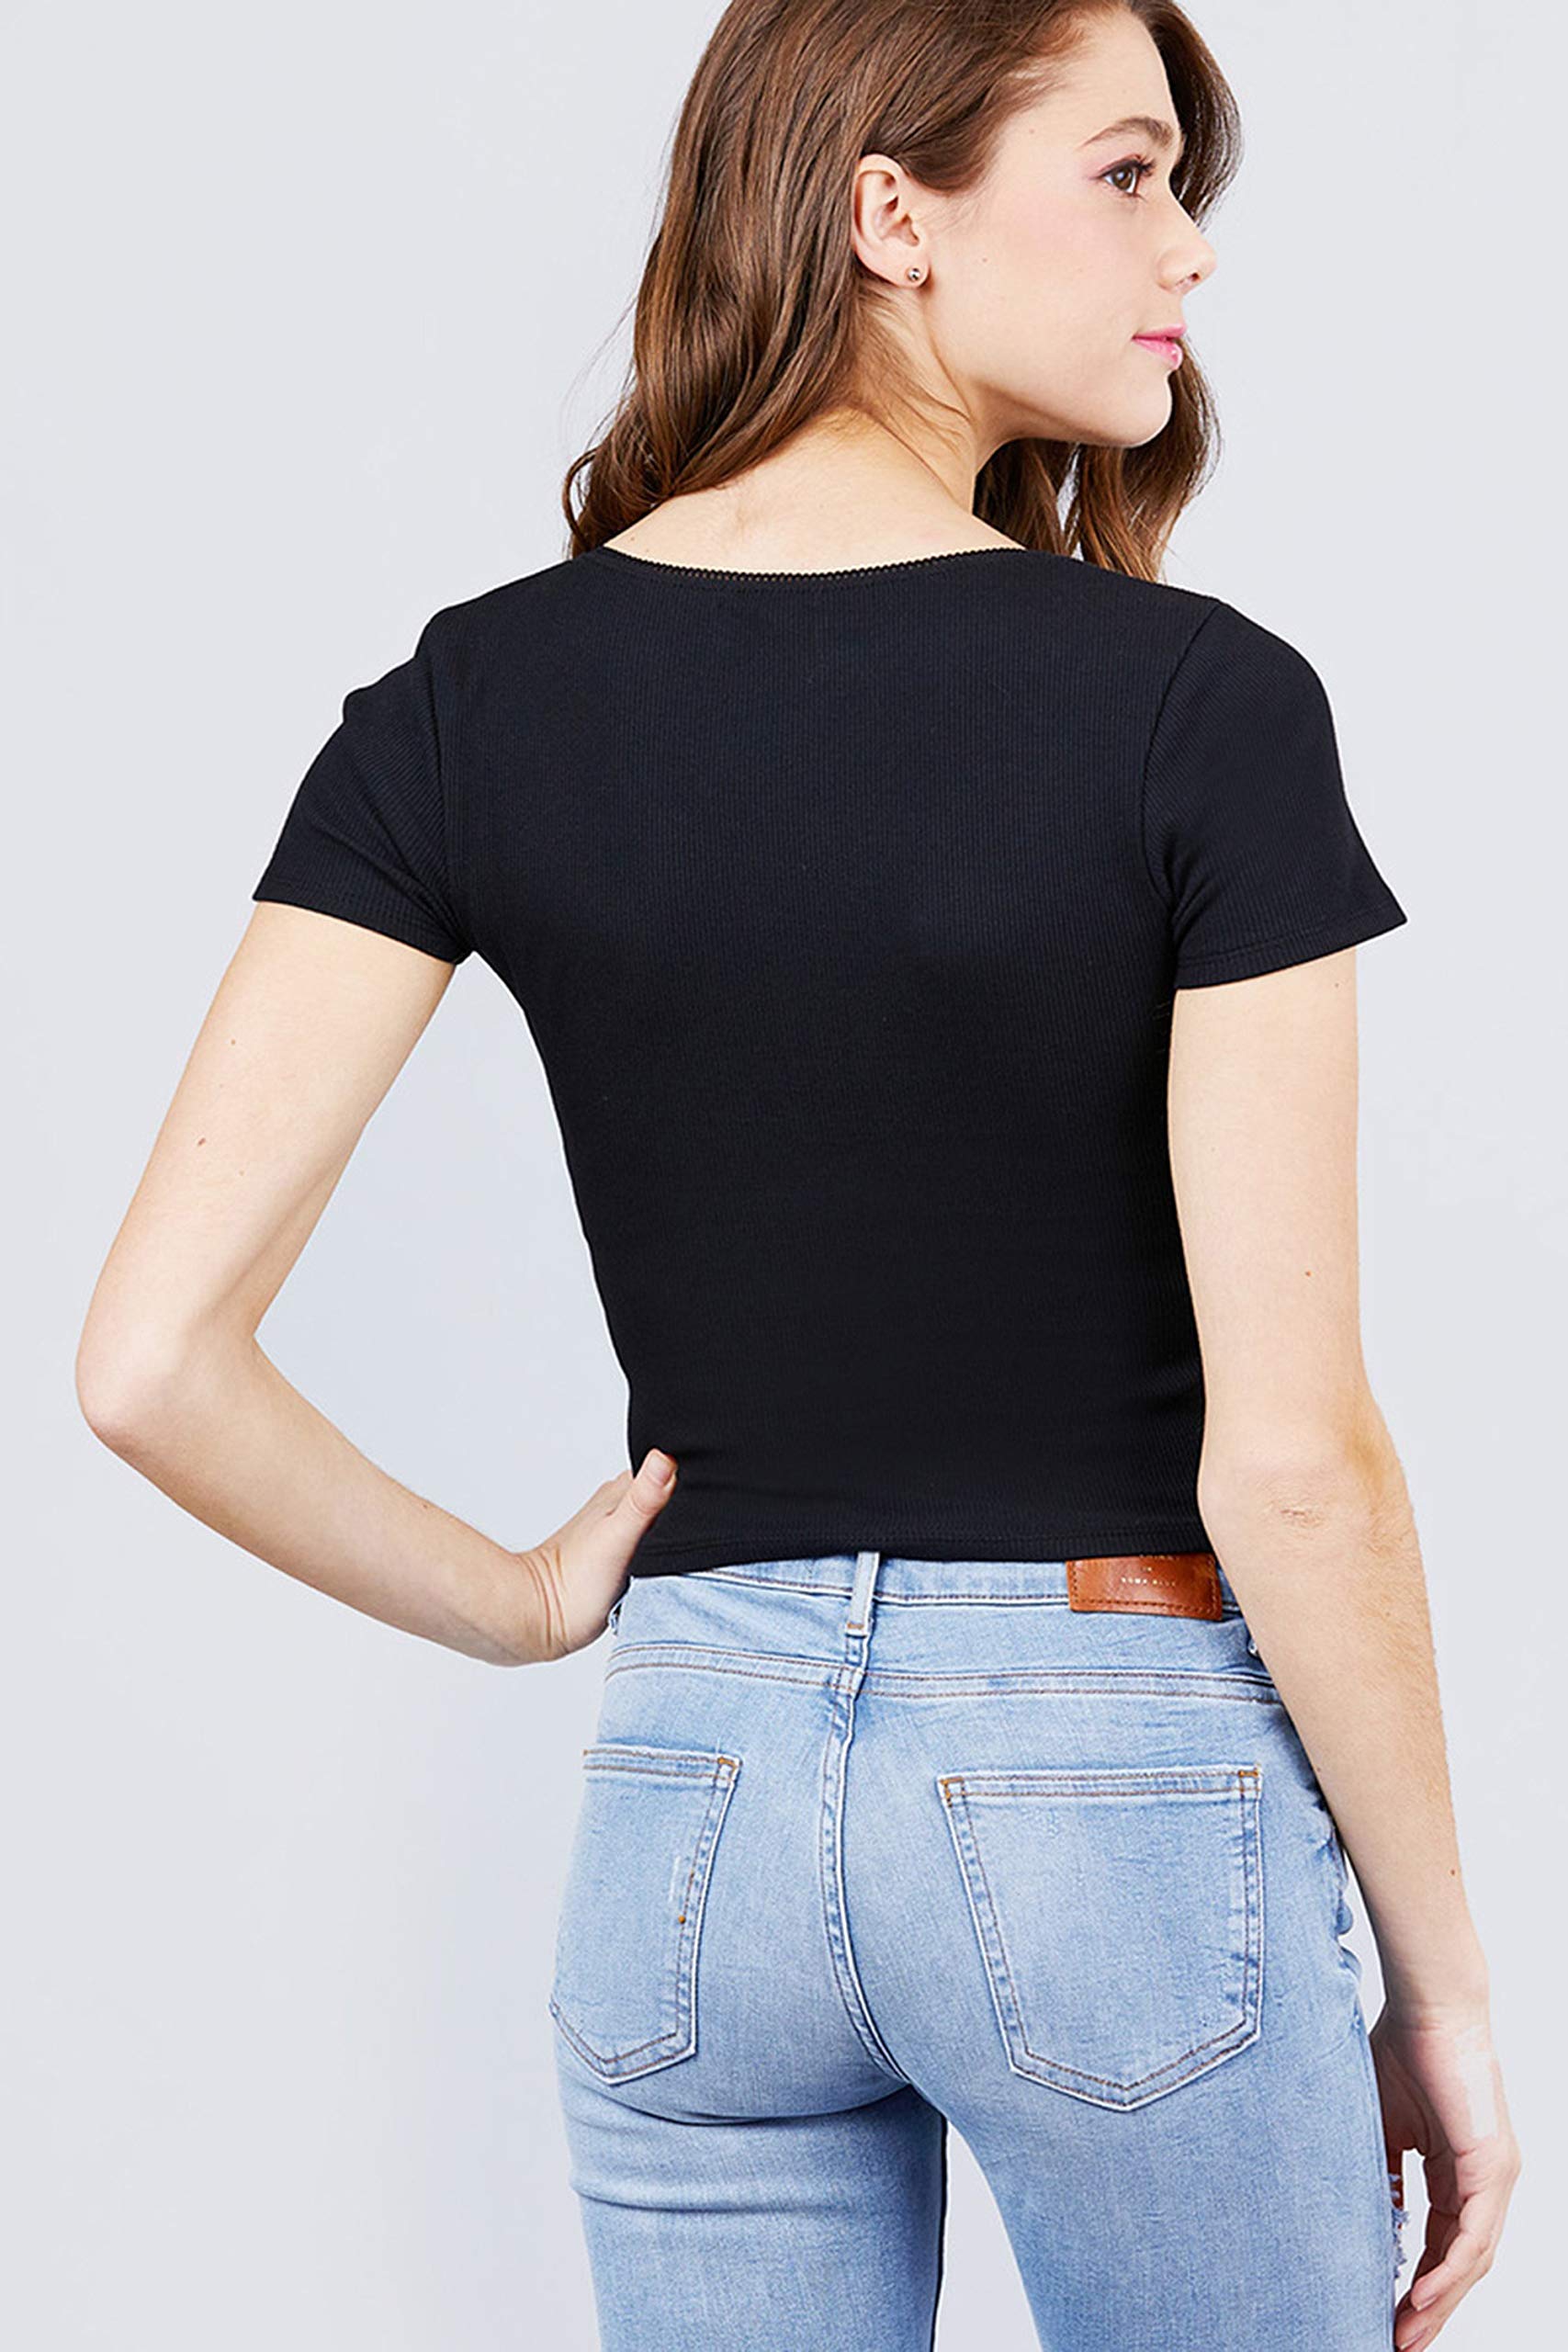 Short Sleeve Scoop Neck Lace Trim With Button Detail Ribbed Women Girls Cami Black Knit Crop Top - Casual Blouse Tunic - Small